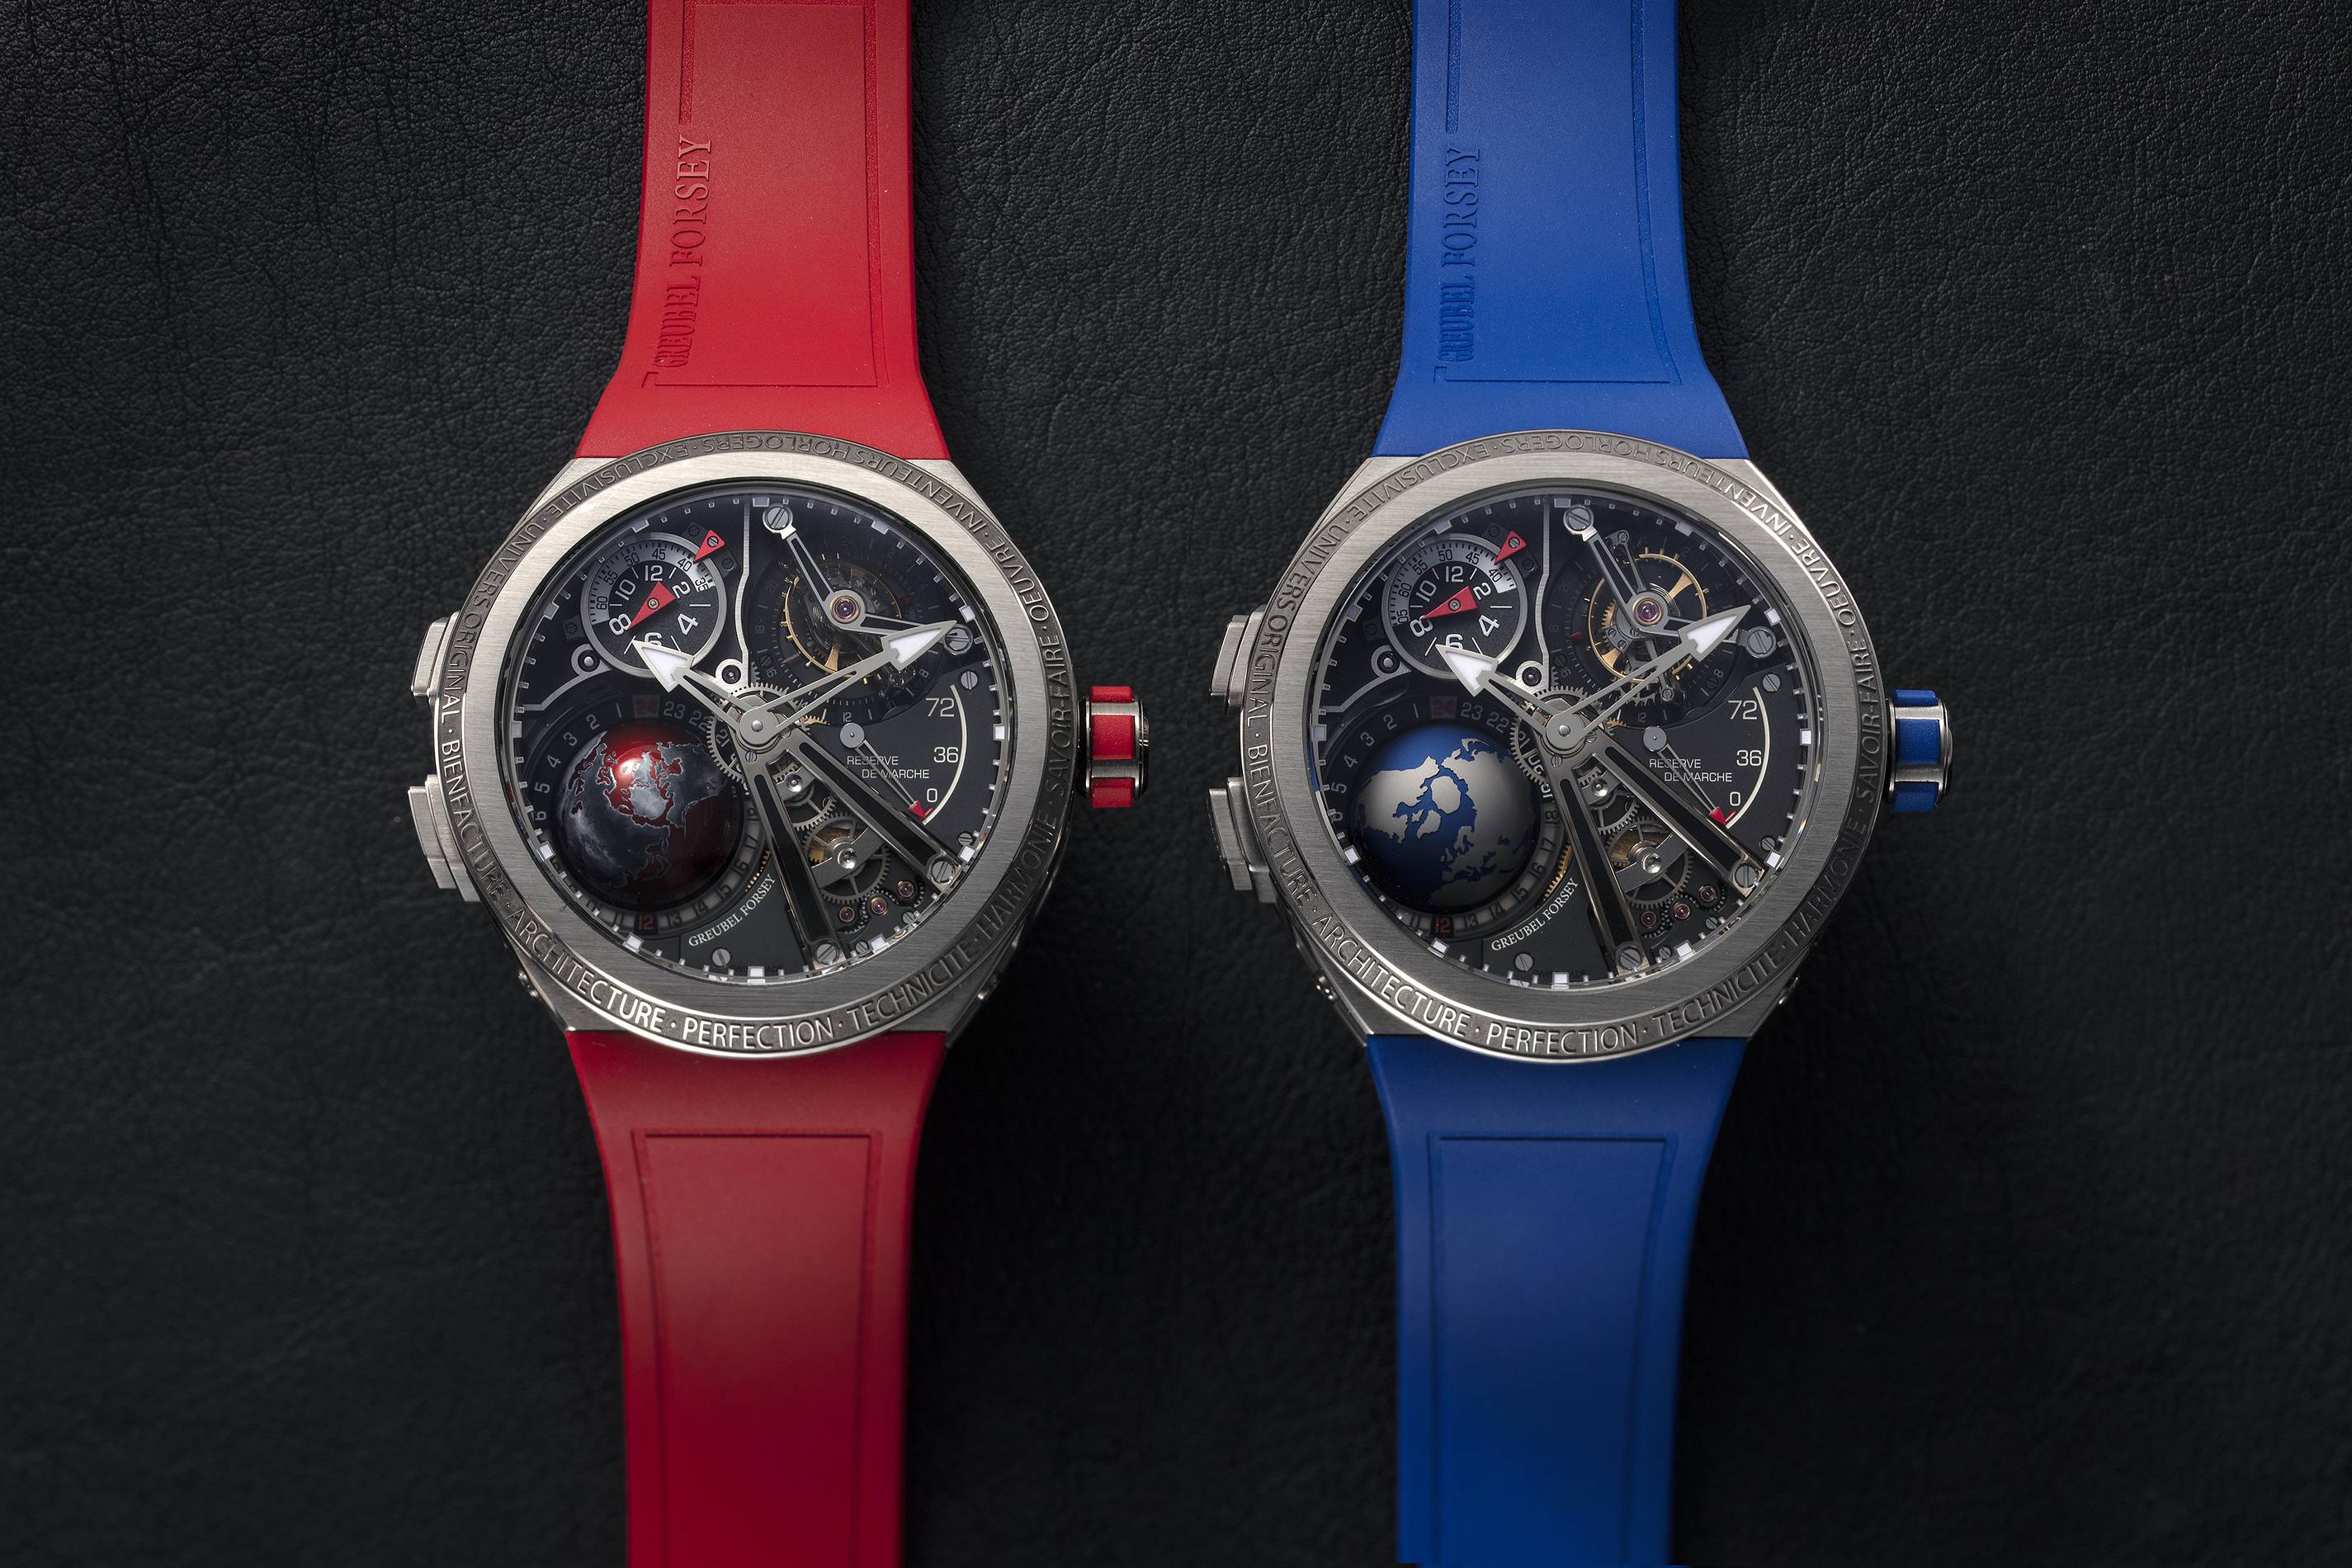 Greubel Forsey GMT Sport watches in blue and red